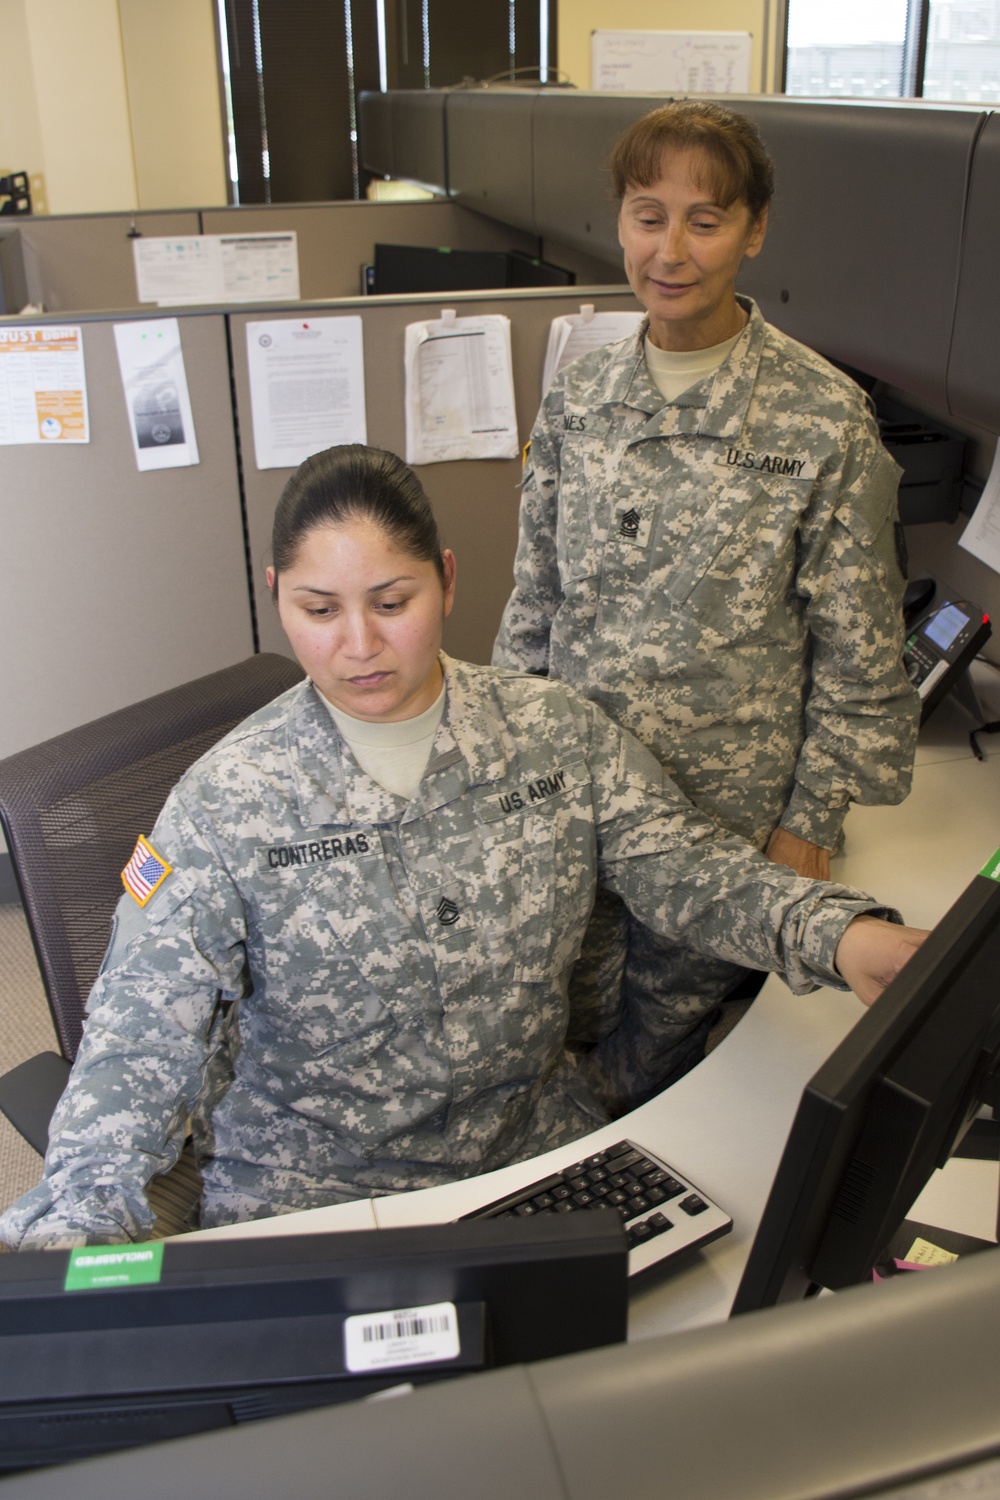 Individual Mobilizaton Augmentees play critical support roles across the Army